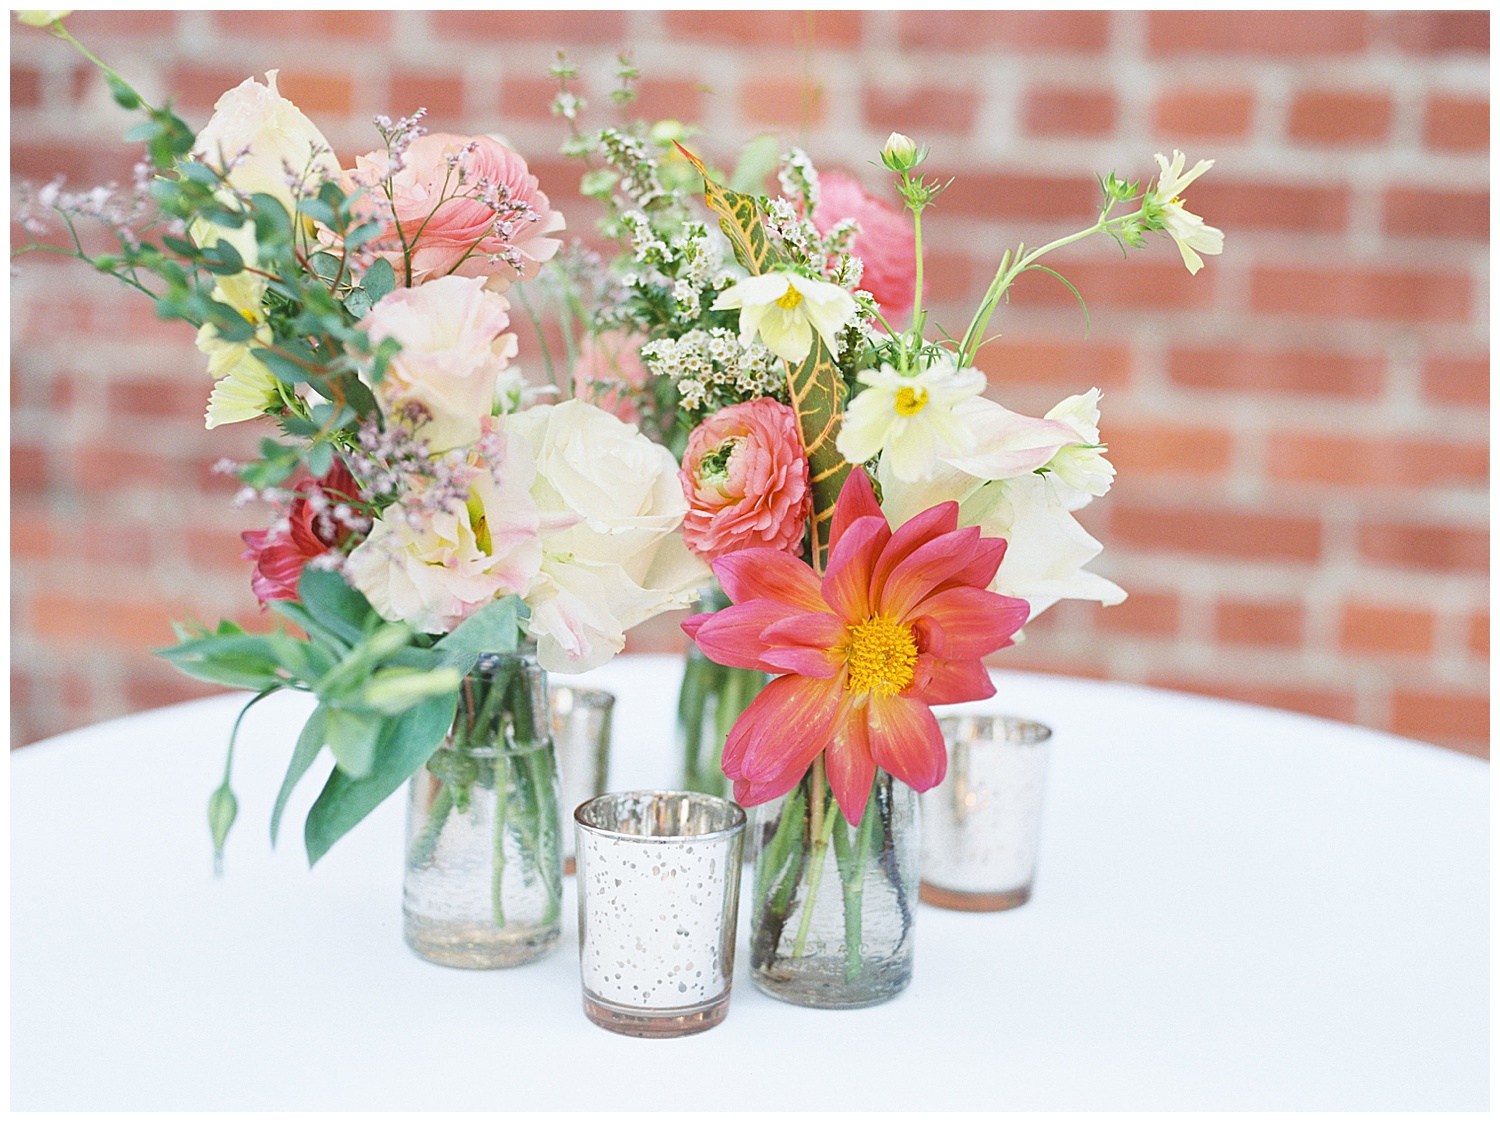 photos of florals on table